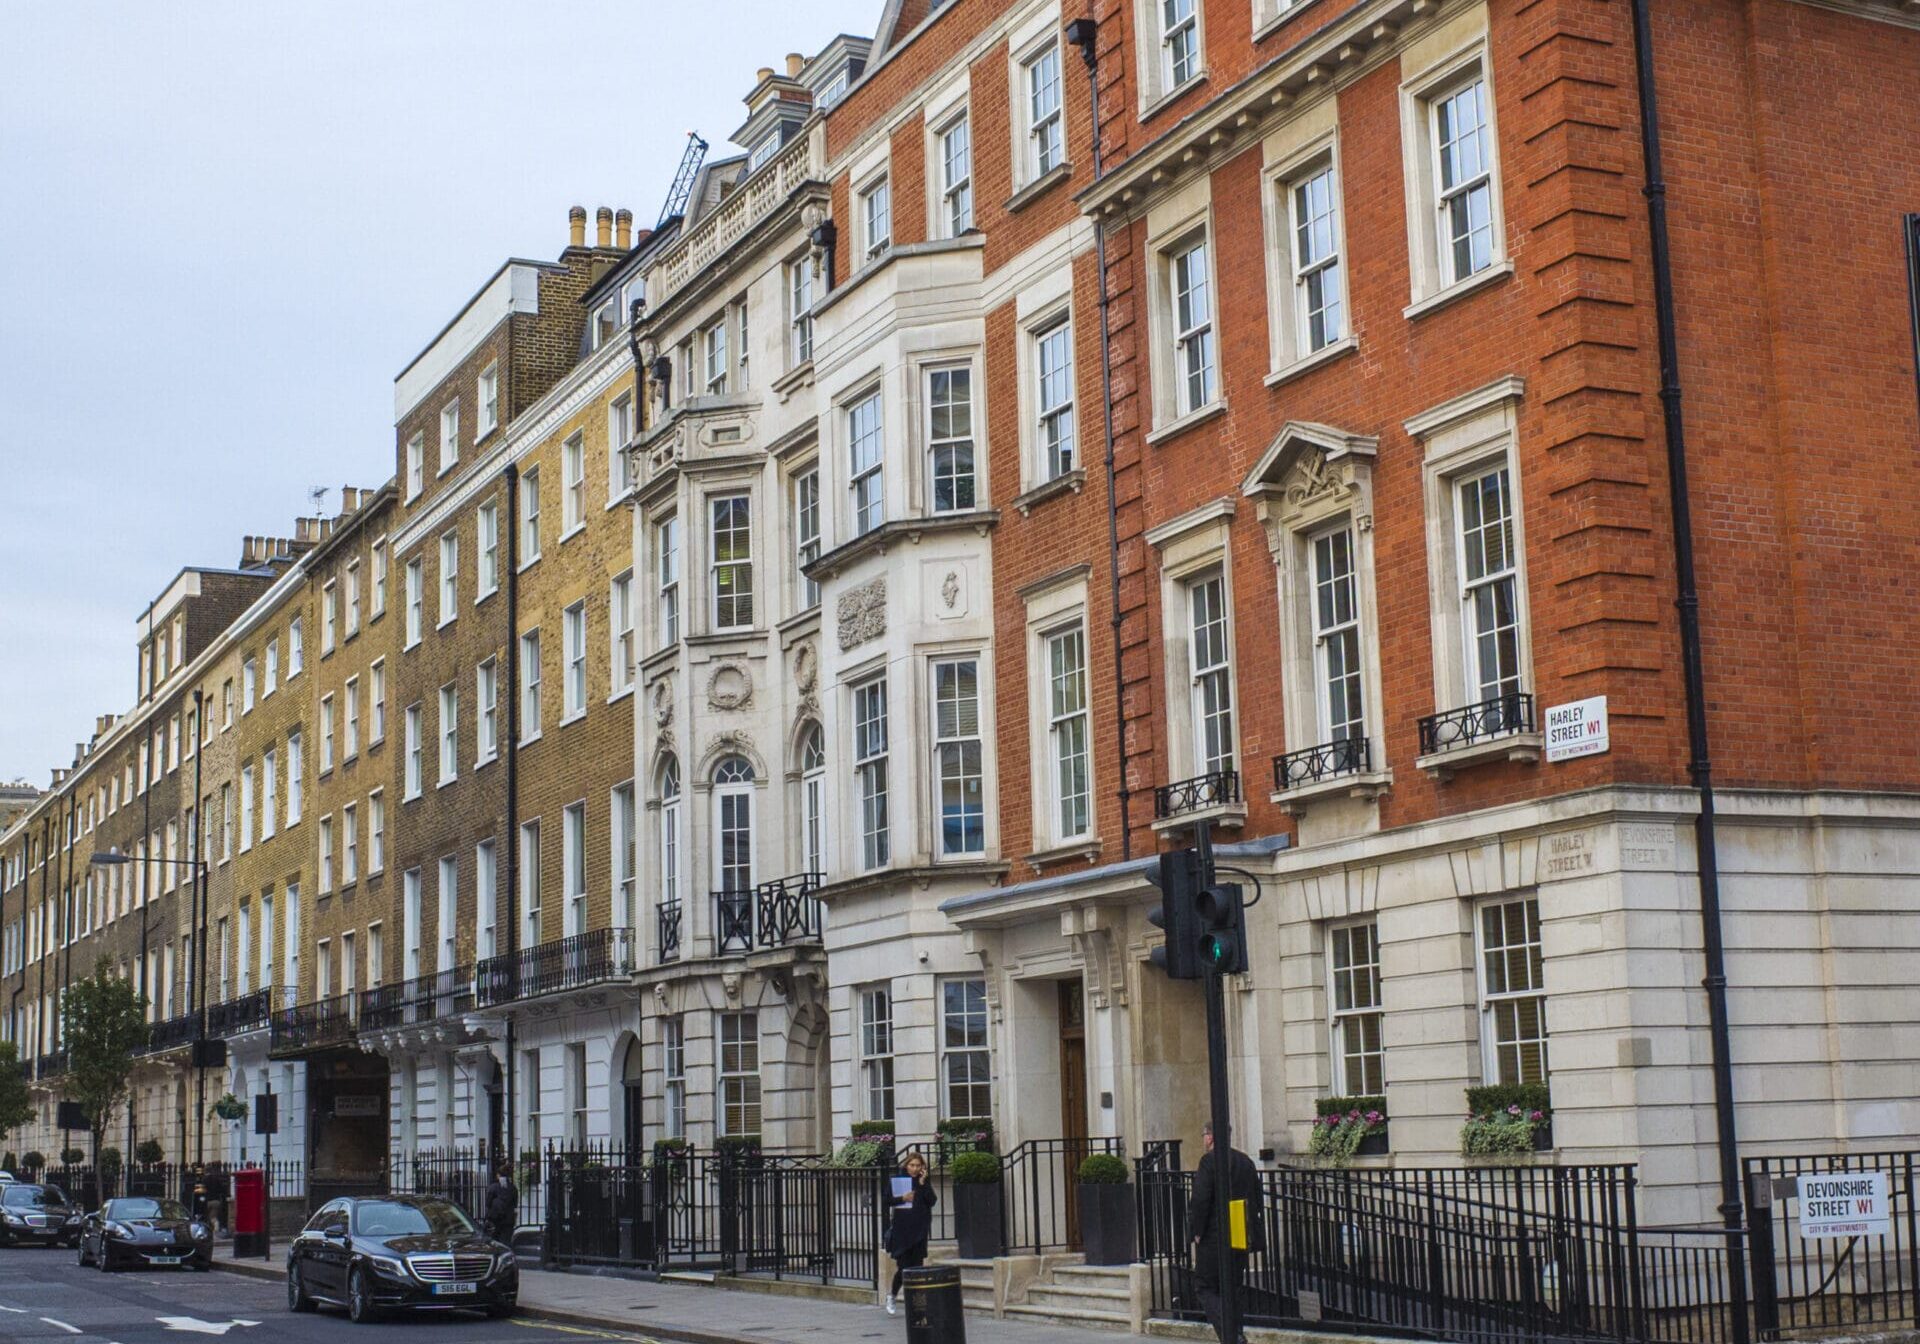 London, Marylebone- October, 2017: Harley Street buildings and street view, a famous London street notable for its many private and specialist health care companies